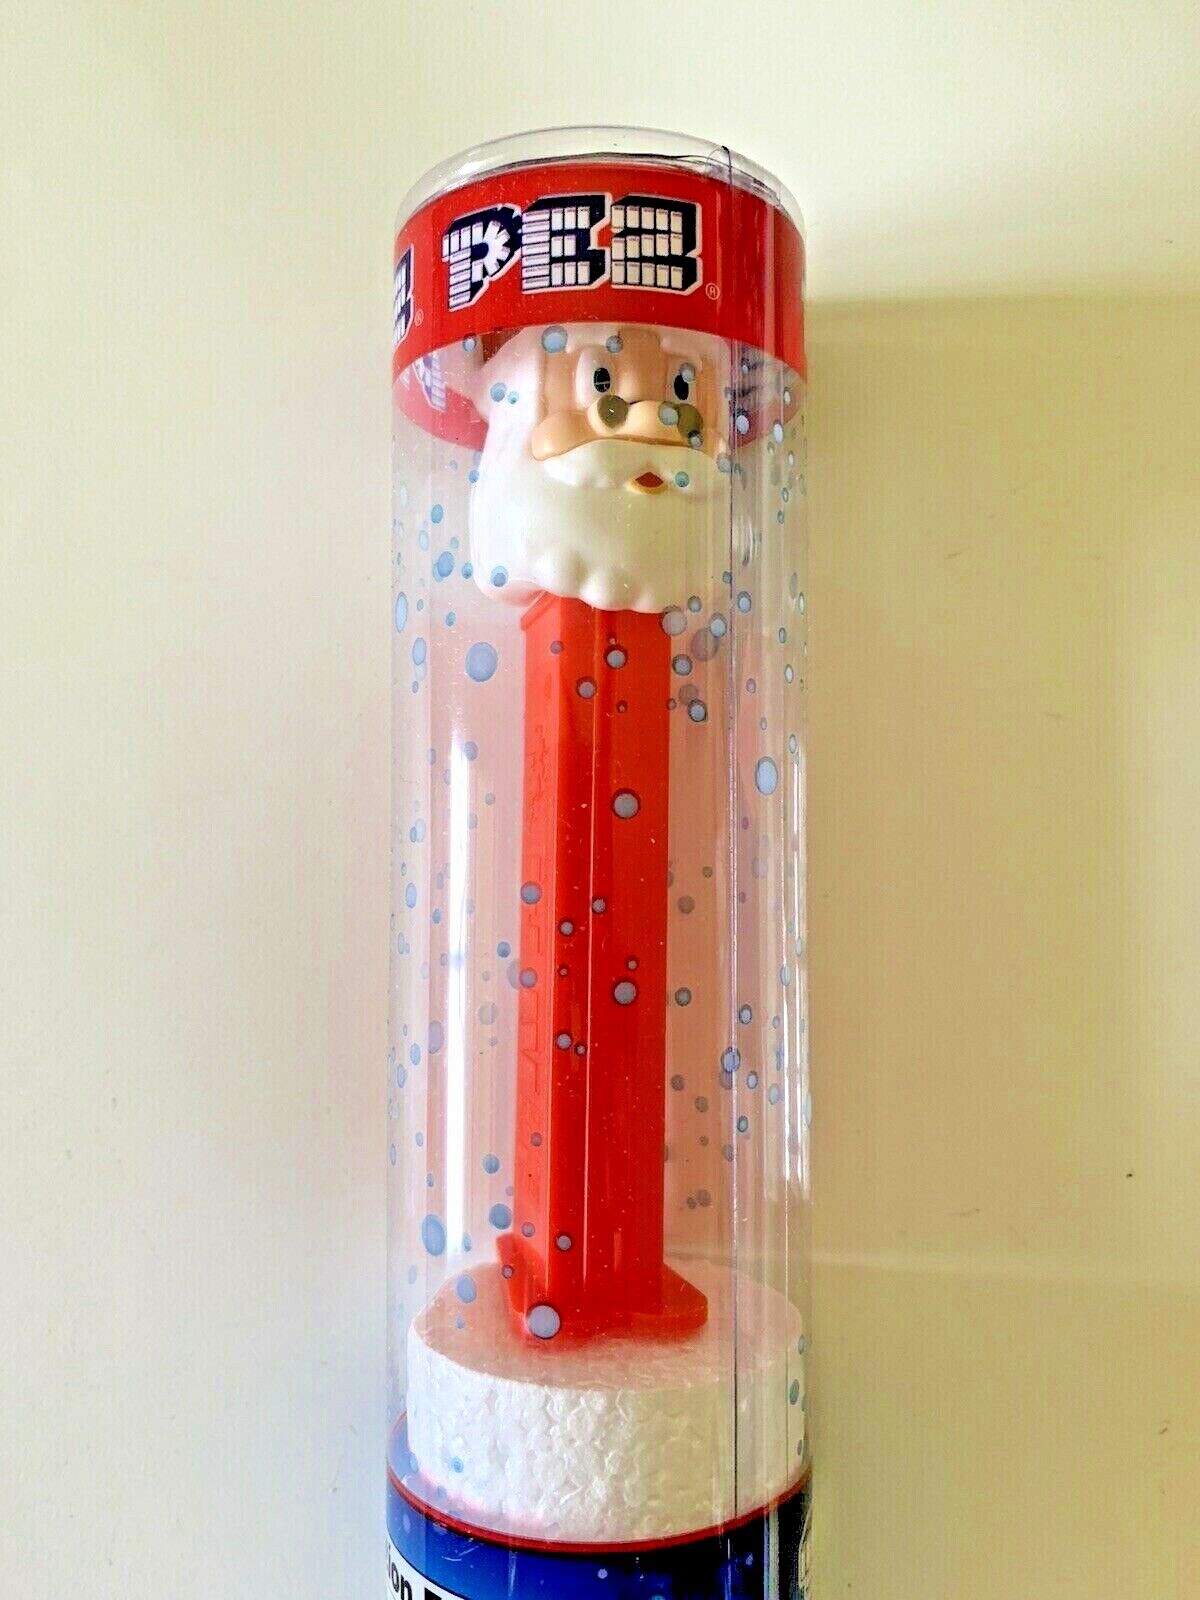 New Santa Claus Pez Dispenser 2019 Tube With Pez Candy Included New Sealed Pack